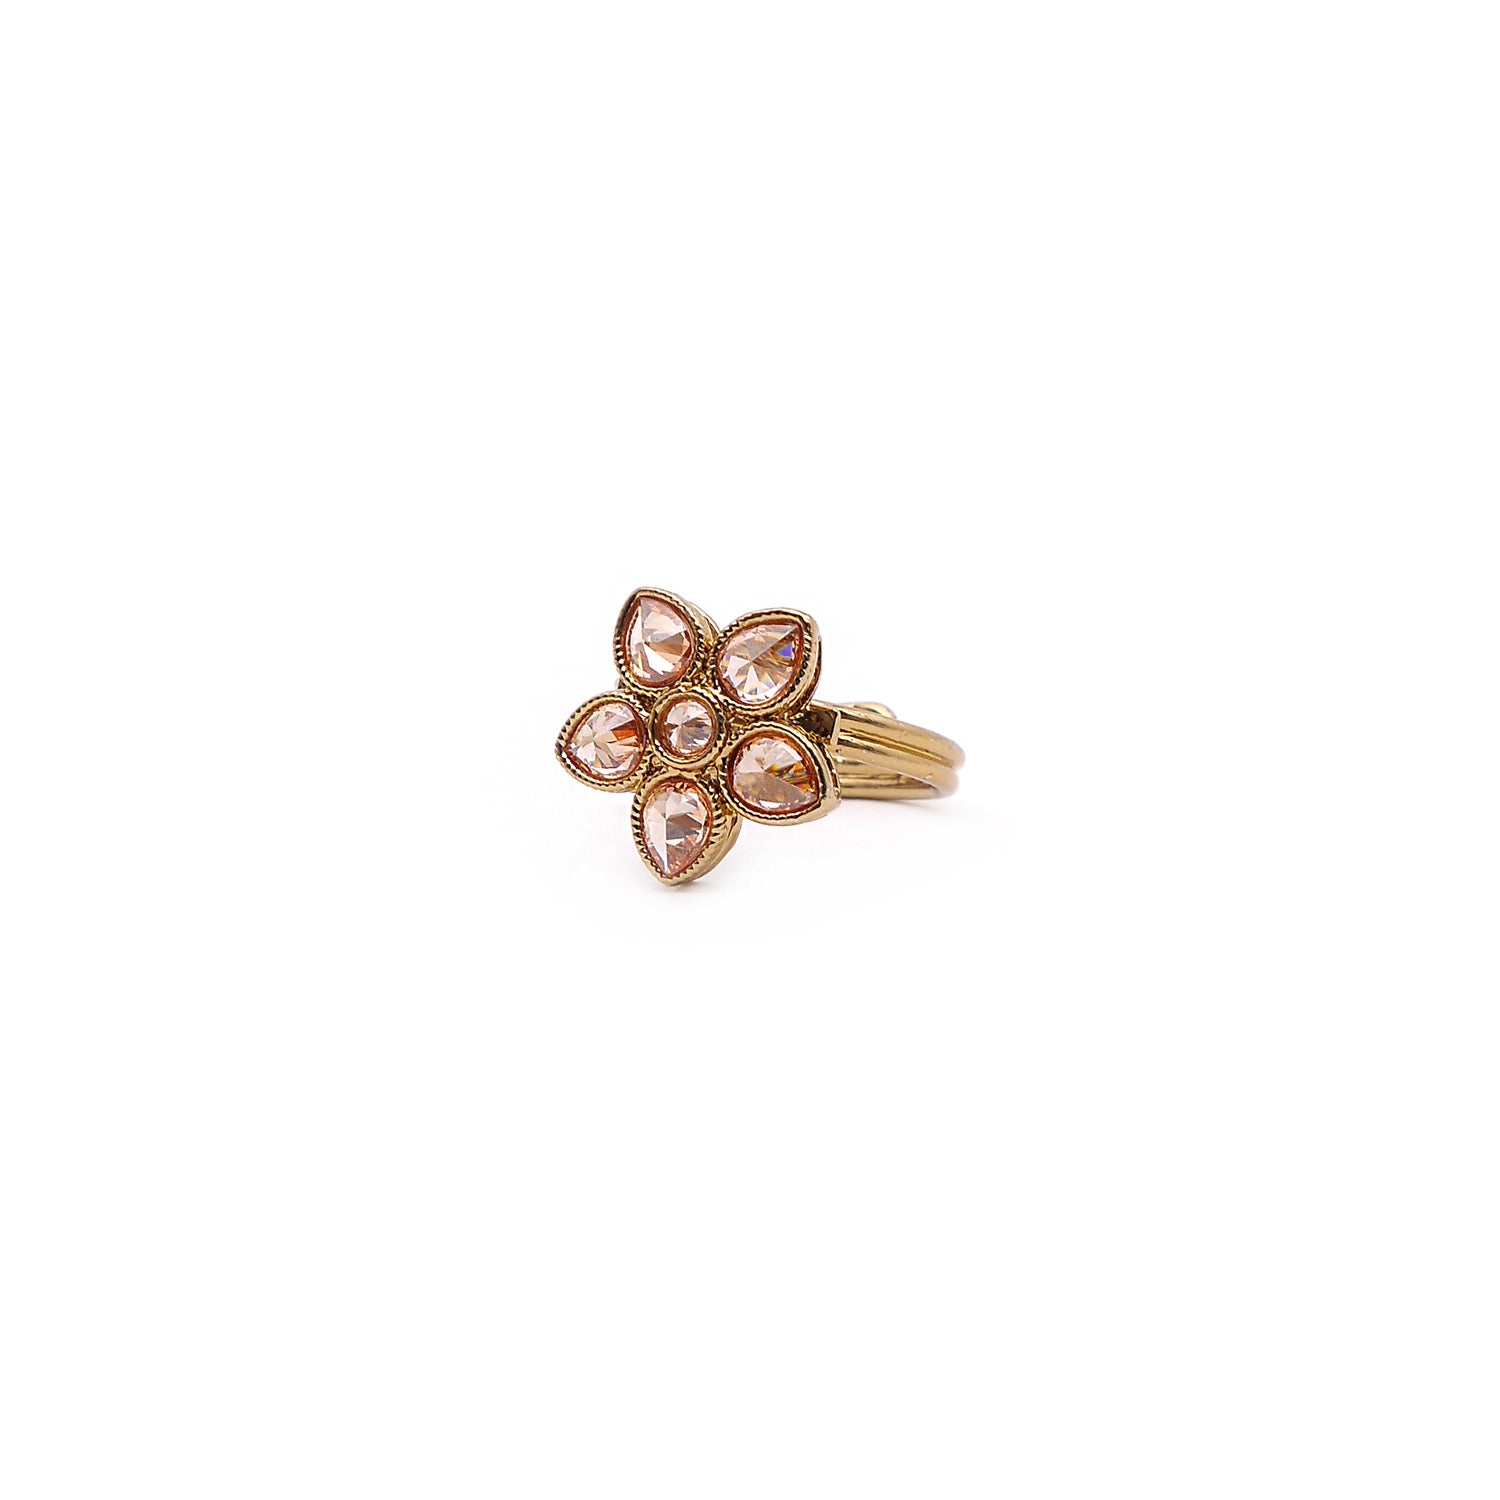 Forget-Me-Not Ring in Antique Gold